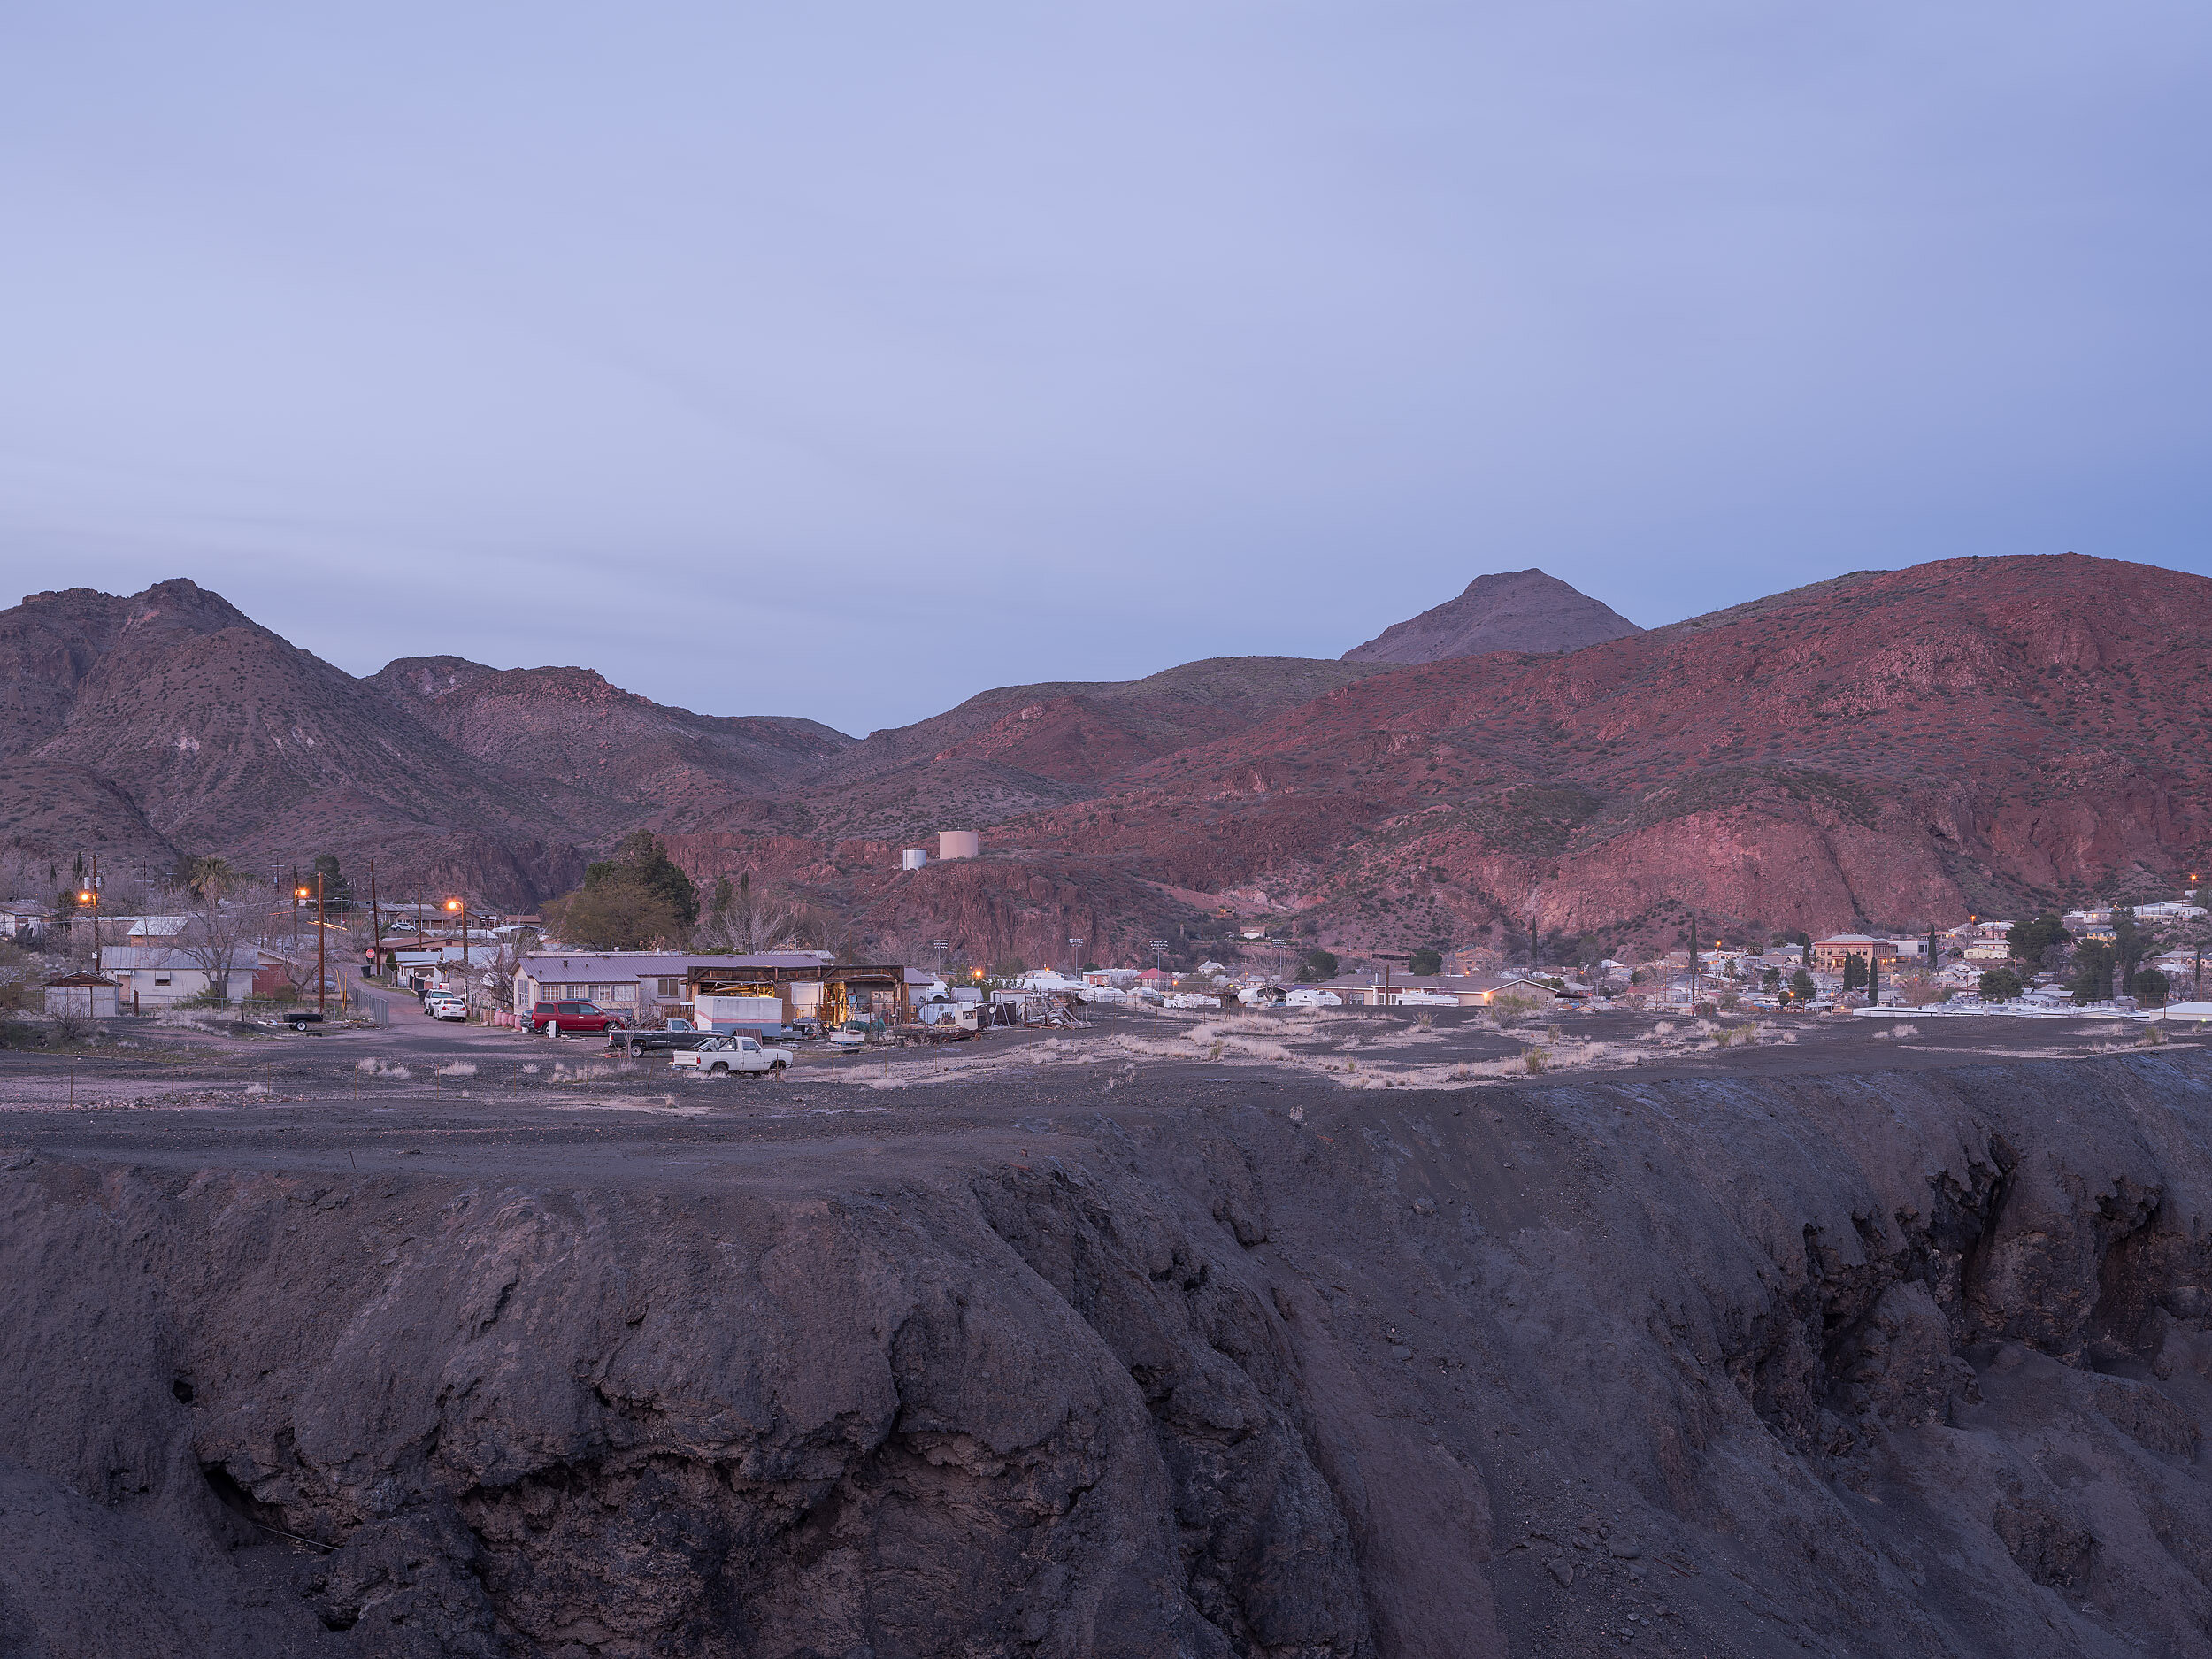  A portion of neighboring Clifton appears to built upon slag, a byproduct of the copper smelting process. In 1984, owned by Phelps-Dodge at the time, the Morenci Mine abandoned smelting at this site and has since been shipping its copper concentrates